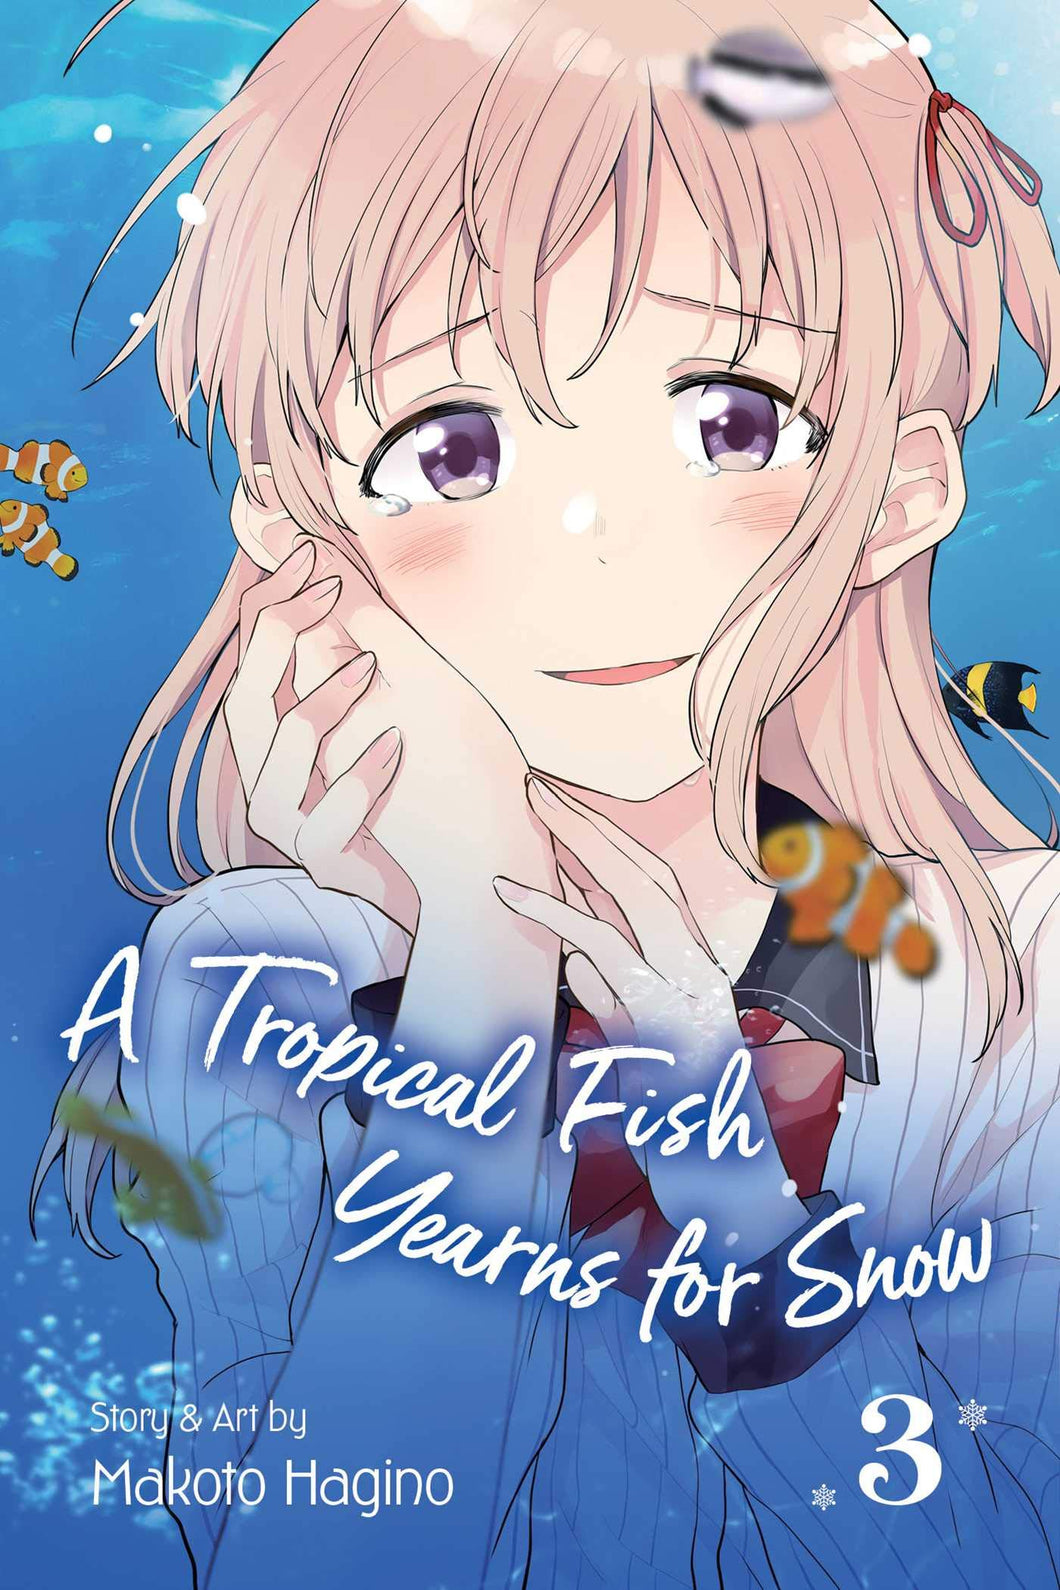 A Tropical Fish Yearns For Snow Volume 3